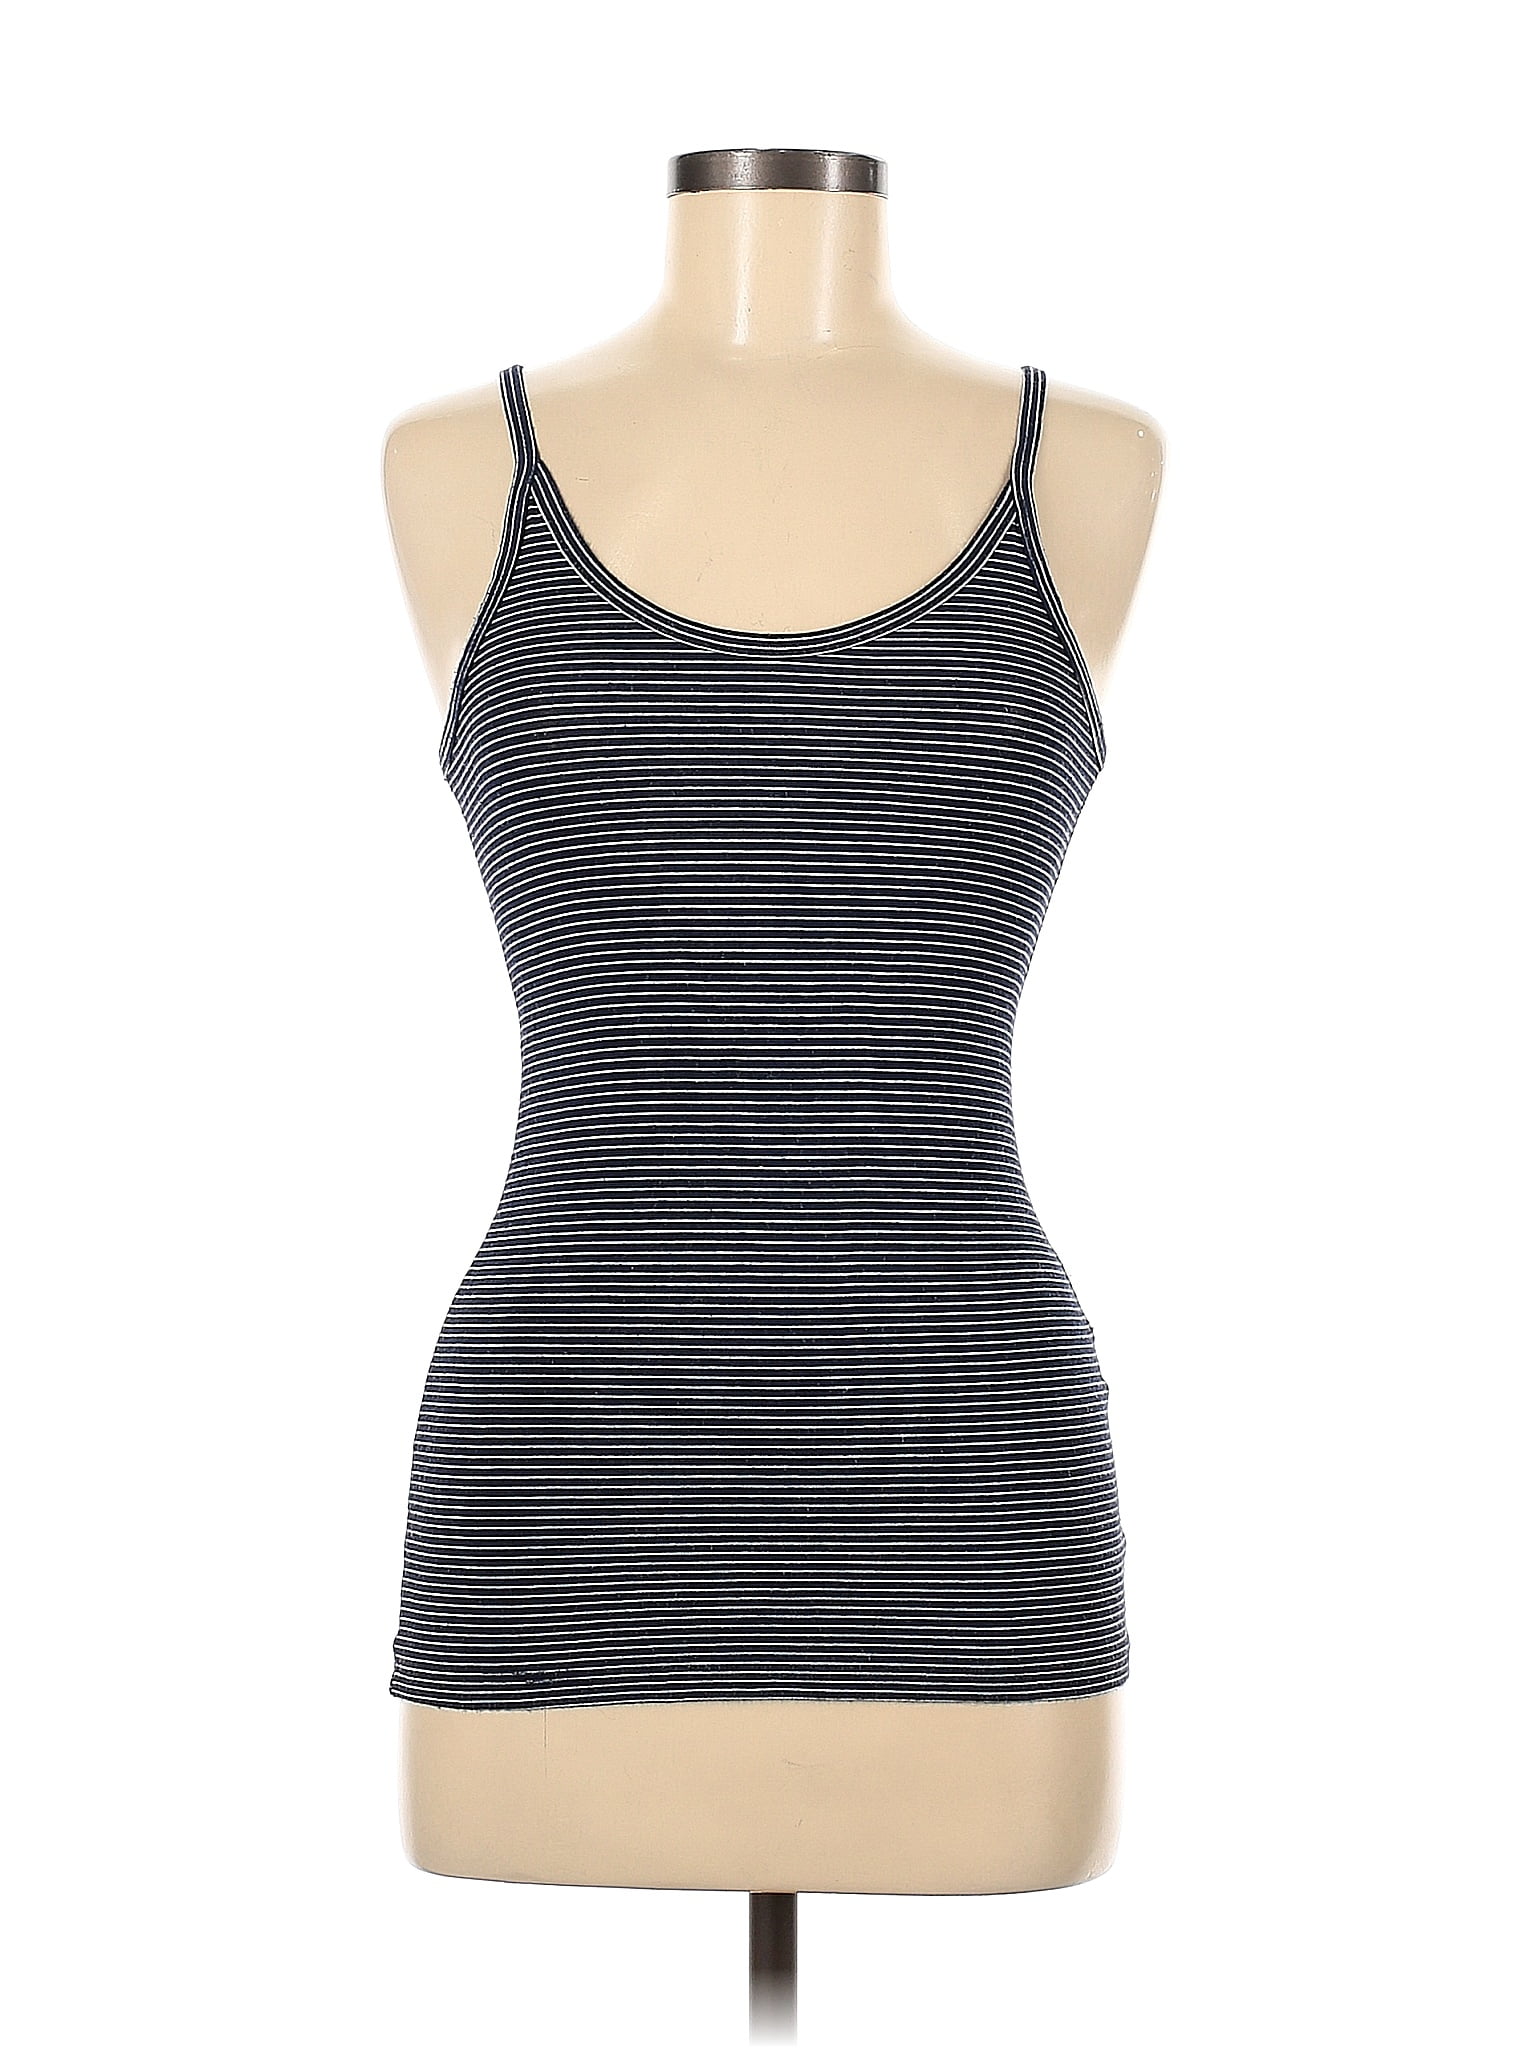 Brandy Melville Stripes Multi Color Gray Tank Top One Size - 36% off